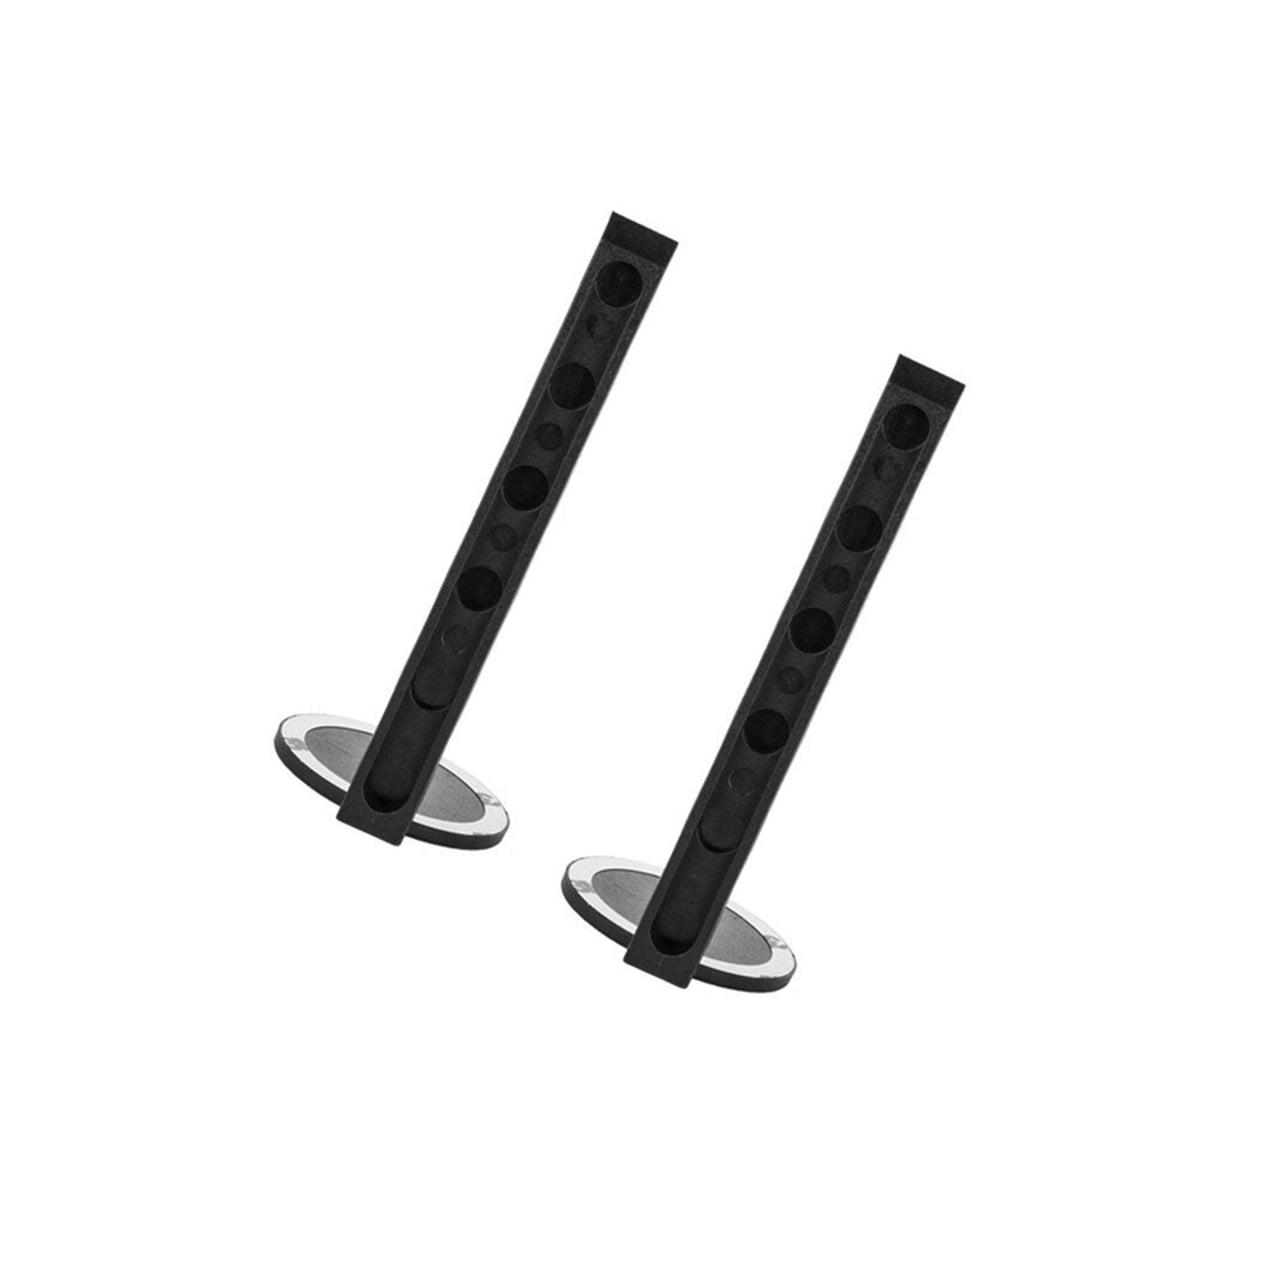 First Strike Floating Stock Bar - 2 Pack - Tiberius Arms